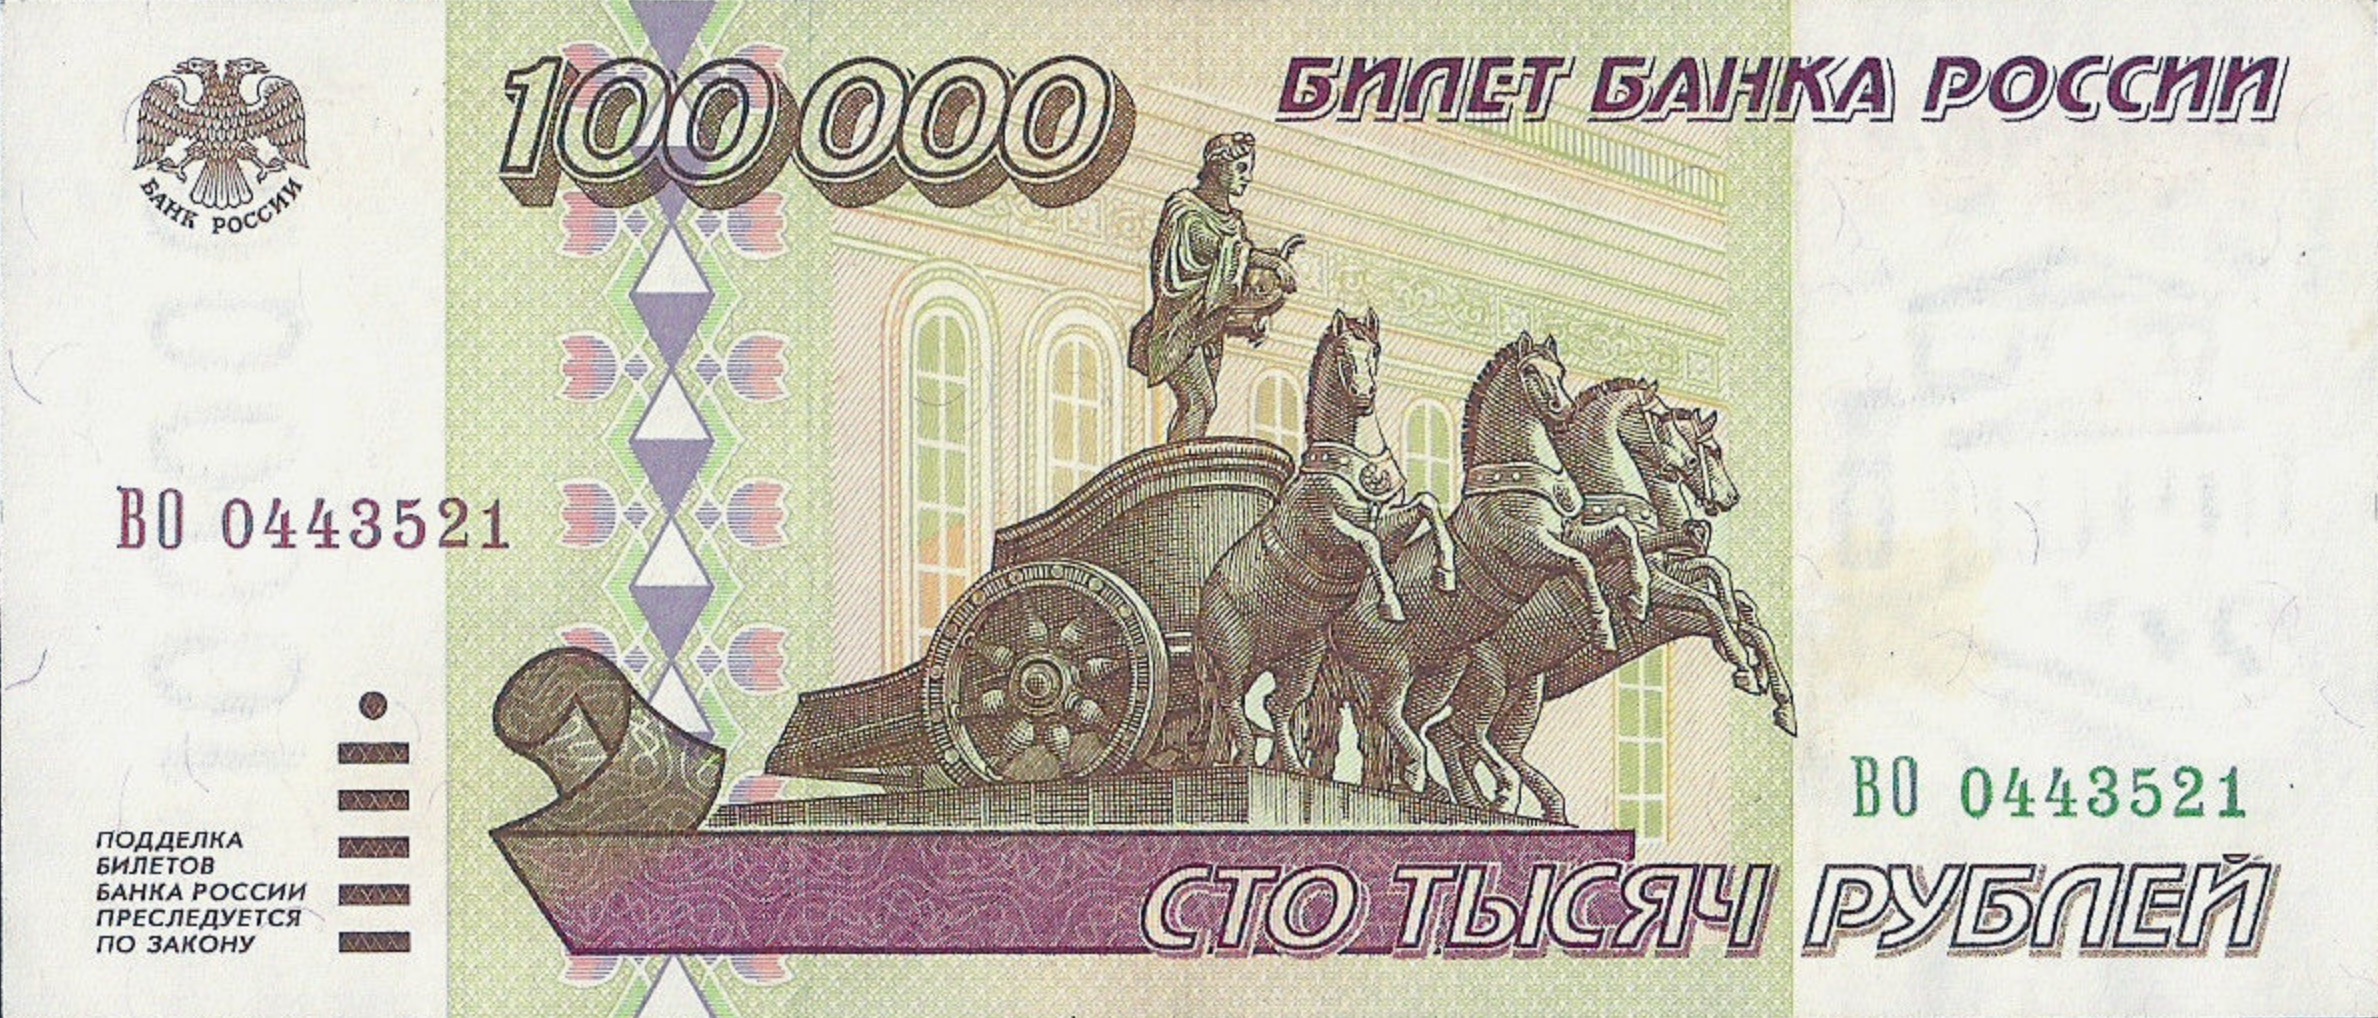 100000 Russian Rubles banknote 1995 - Exchange yours for cash today ...